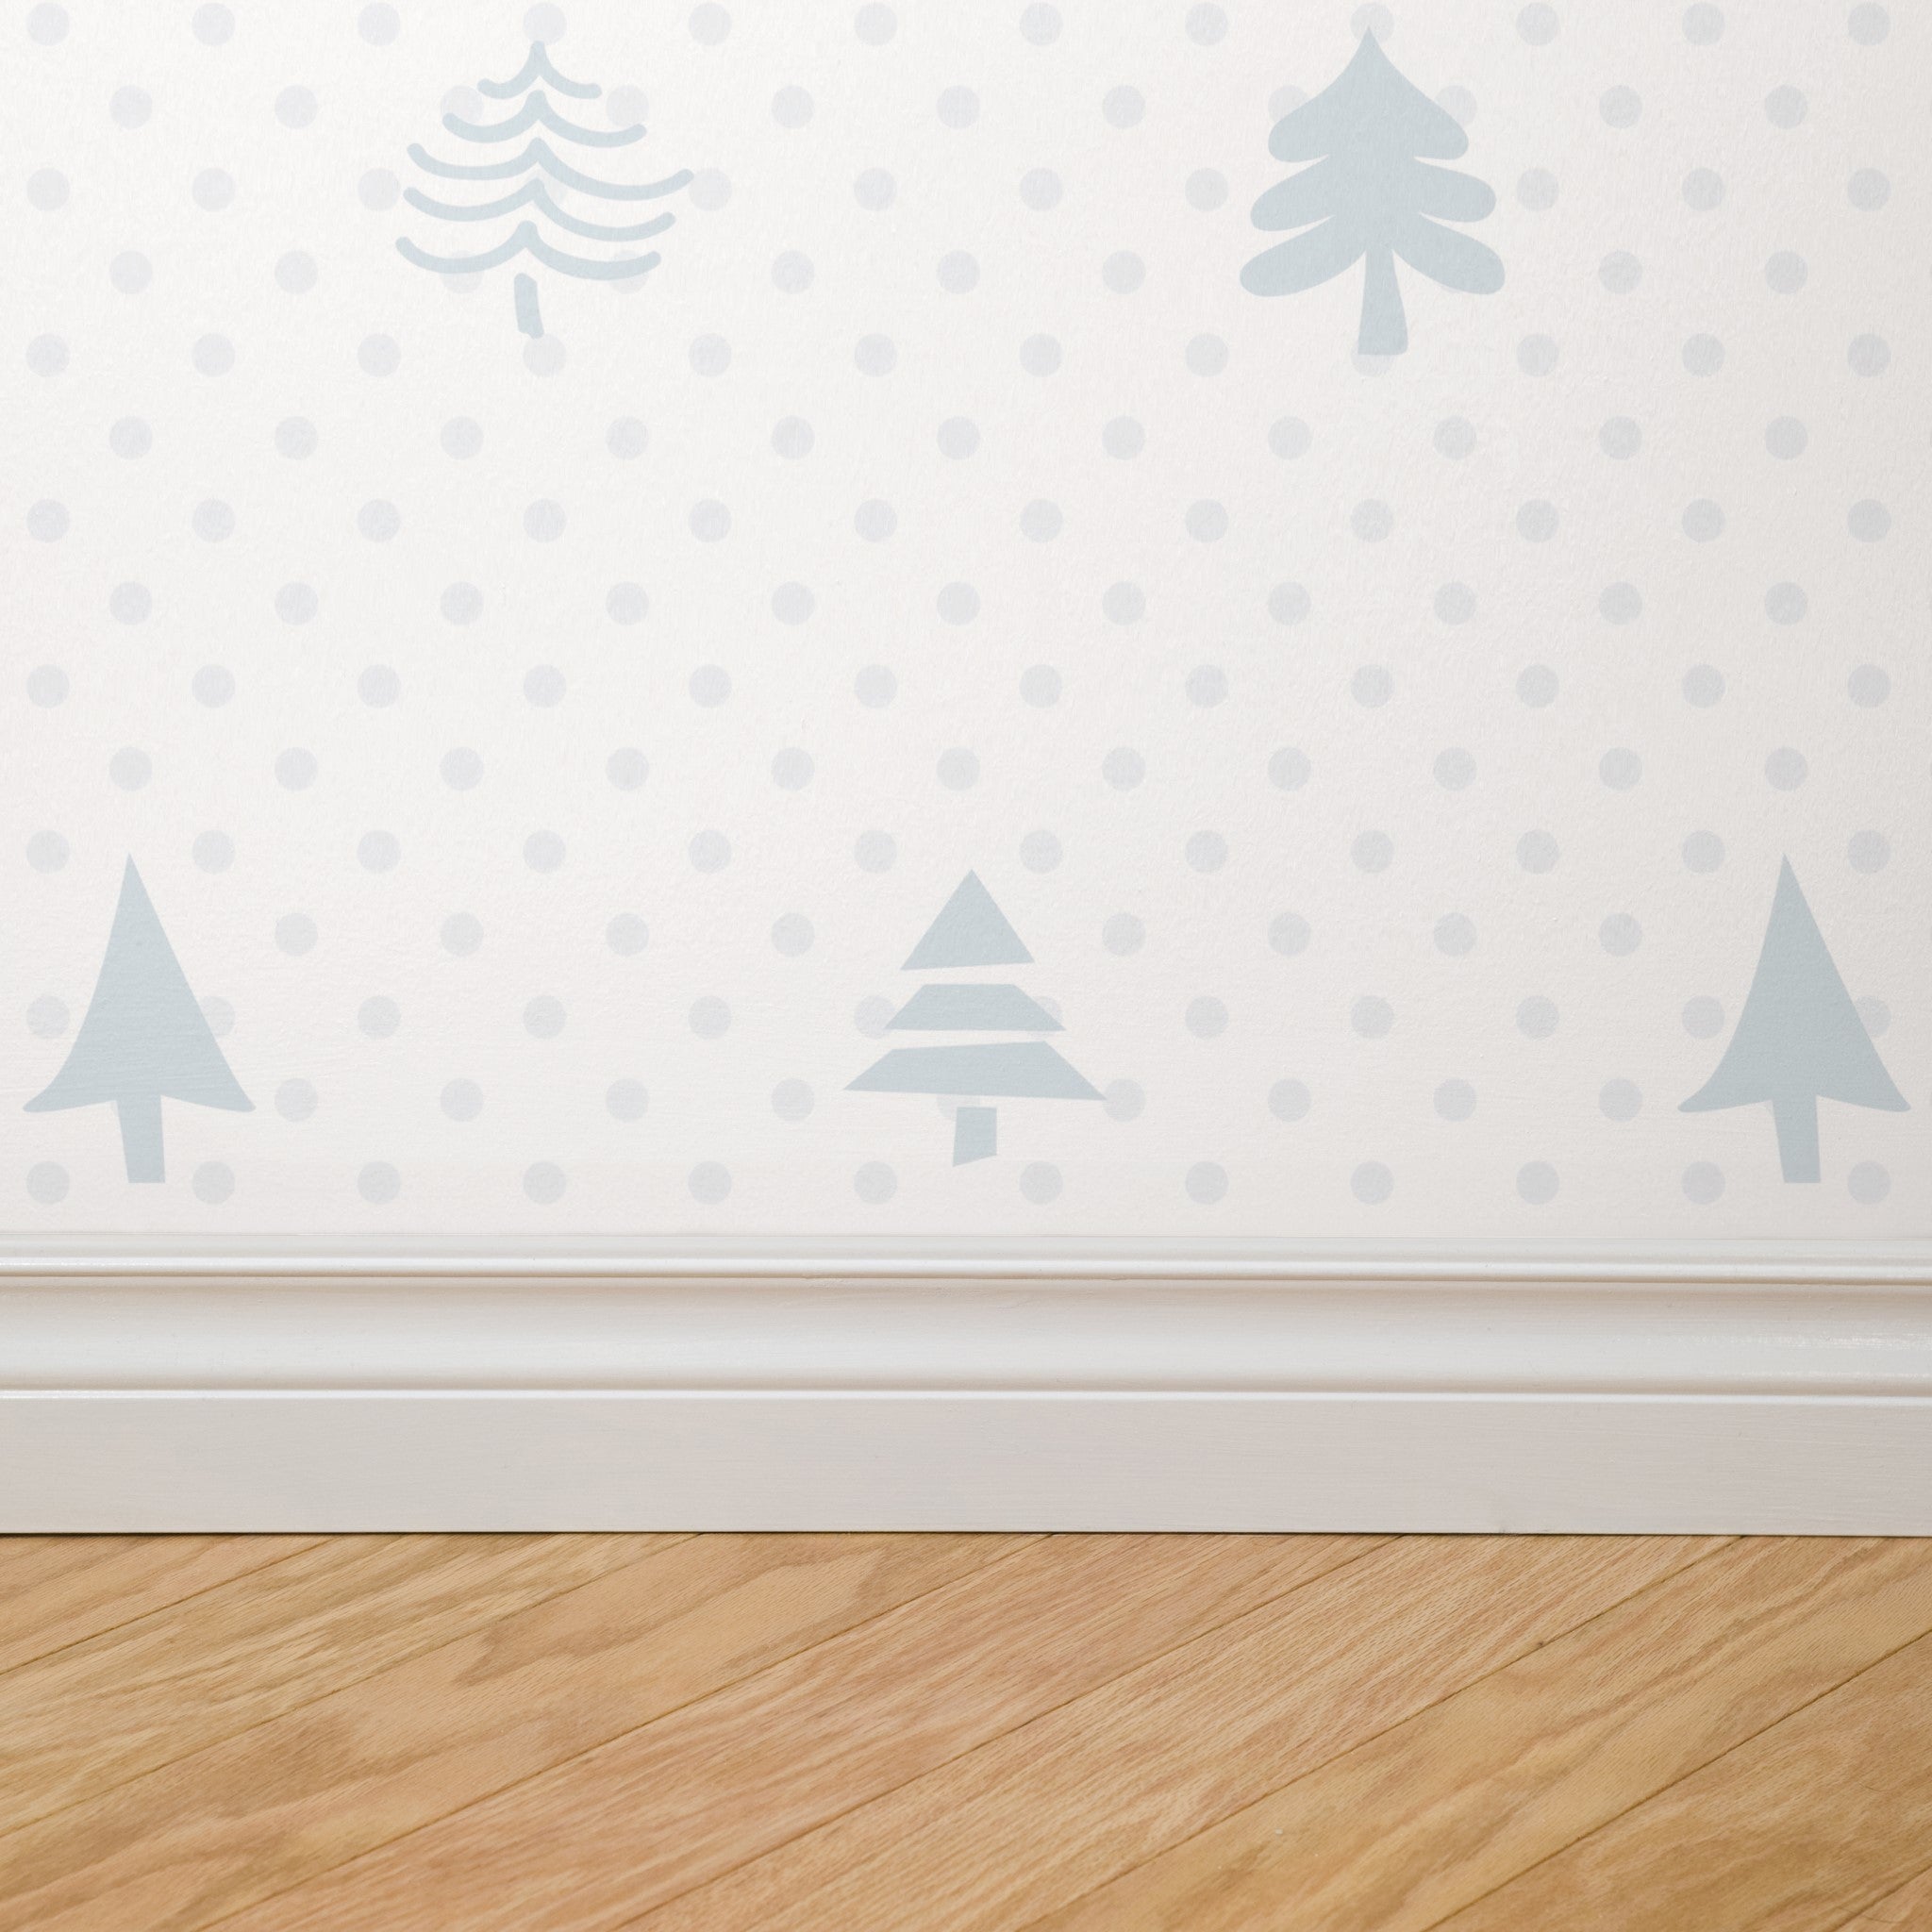 Alt text: "Elegant Noble Wallpaper by Wall Blush with pine tree design in a minimalist style living room, highlighting the serene decor."